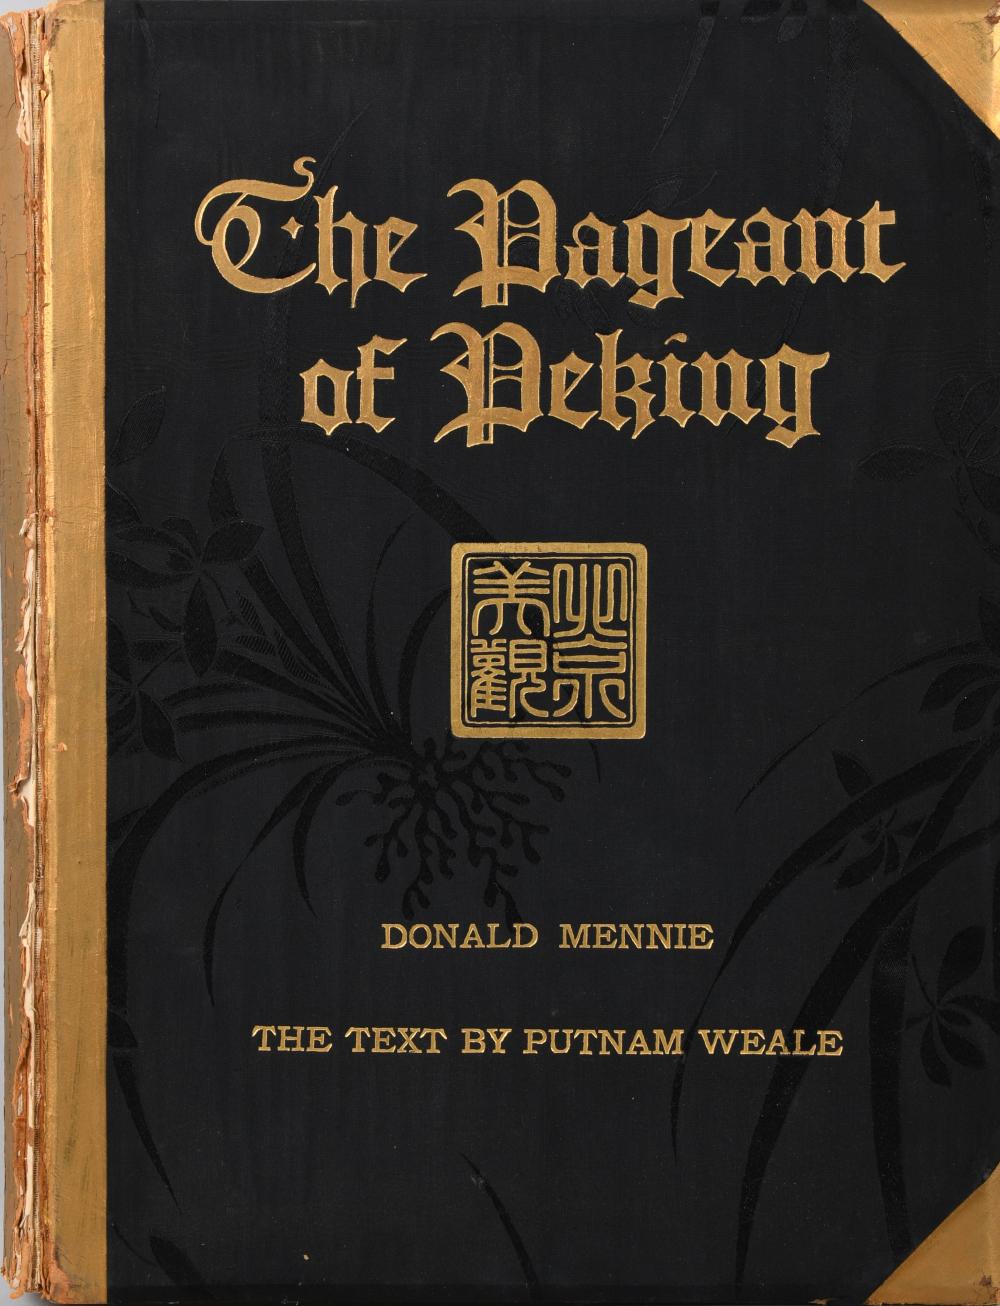 DONALD MENNIE. THE PAGEANT OF PEKING.